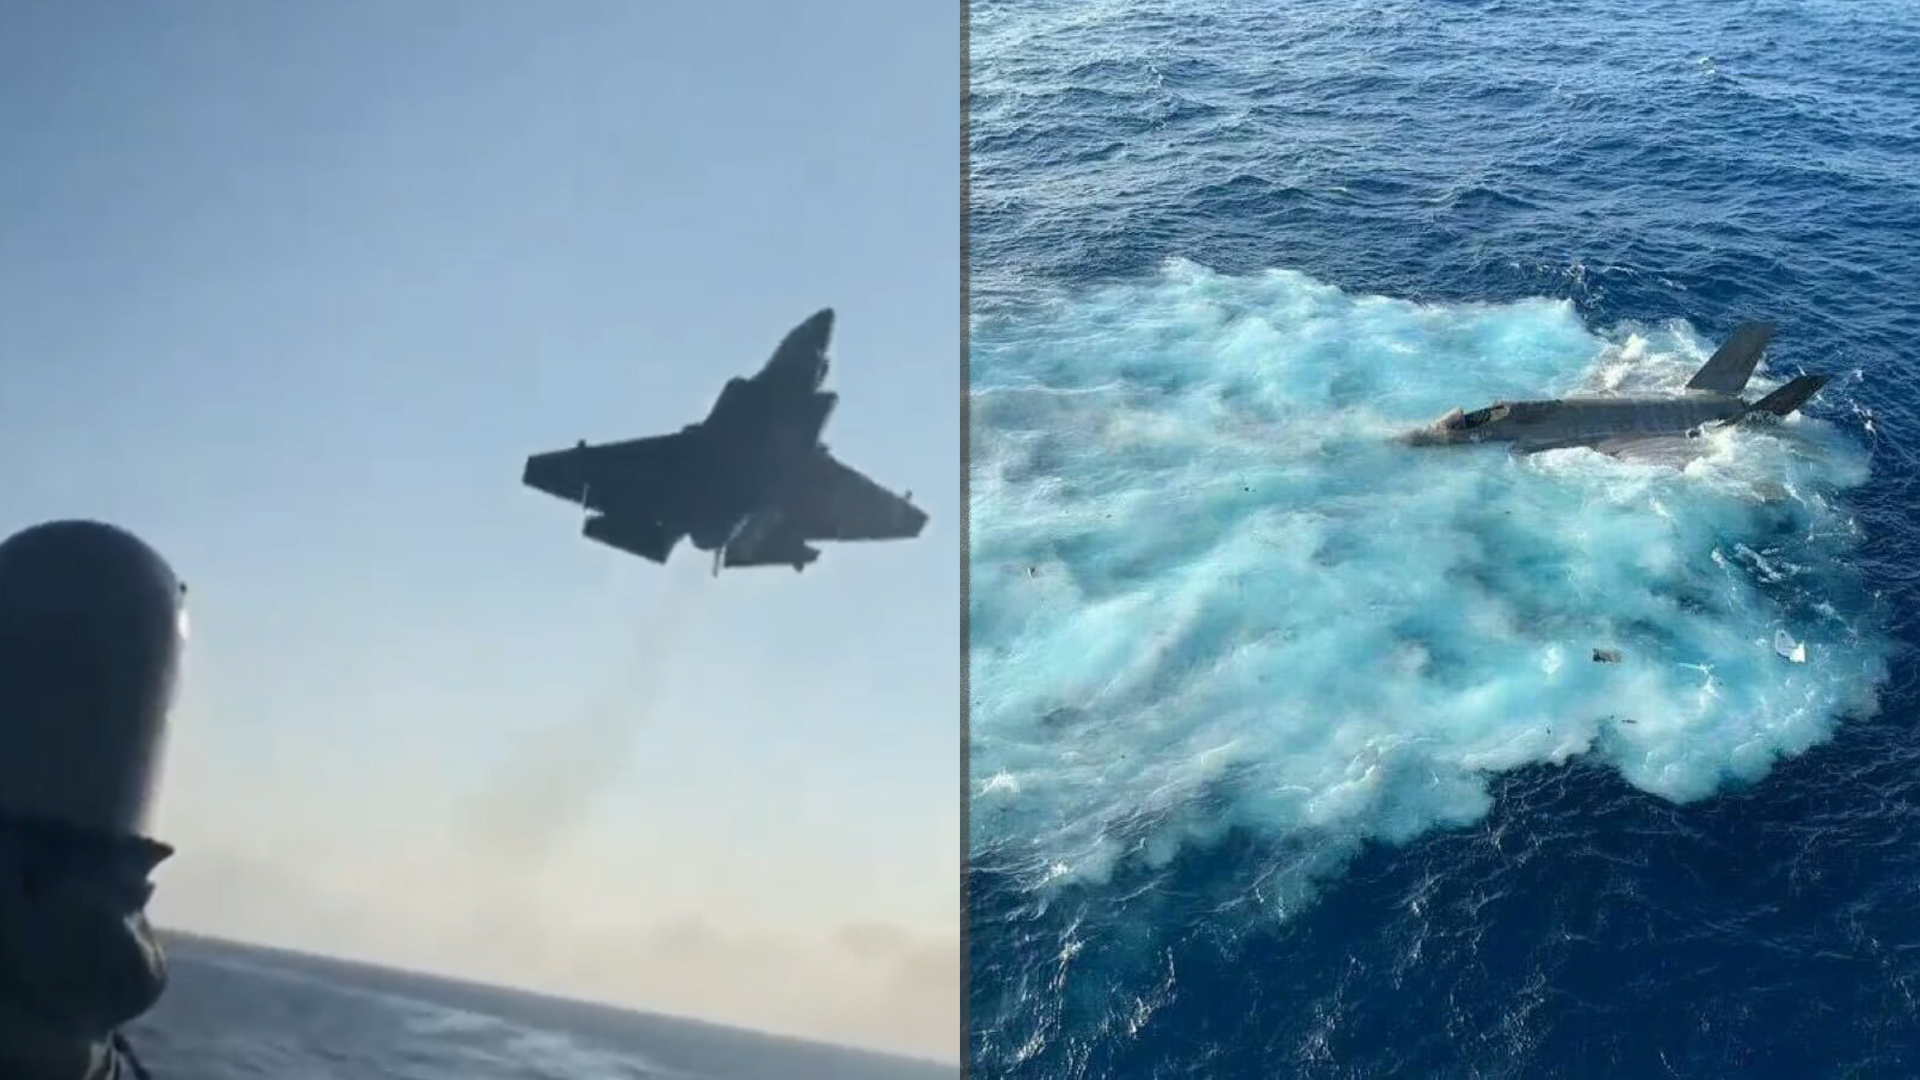 Navy confirms photo and video of F35 crash on USS Carl Vinson are real